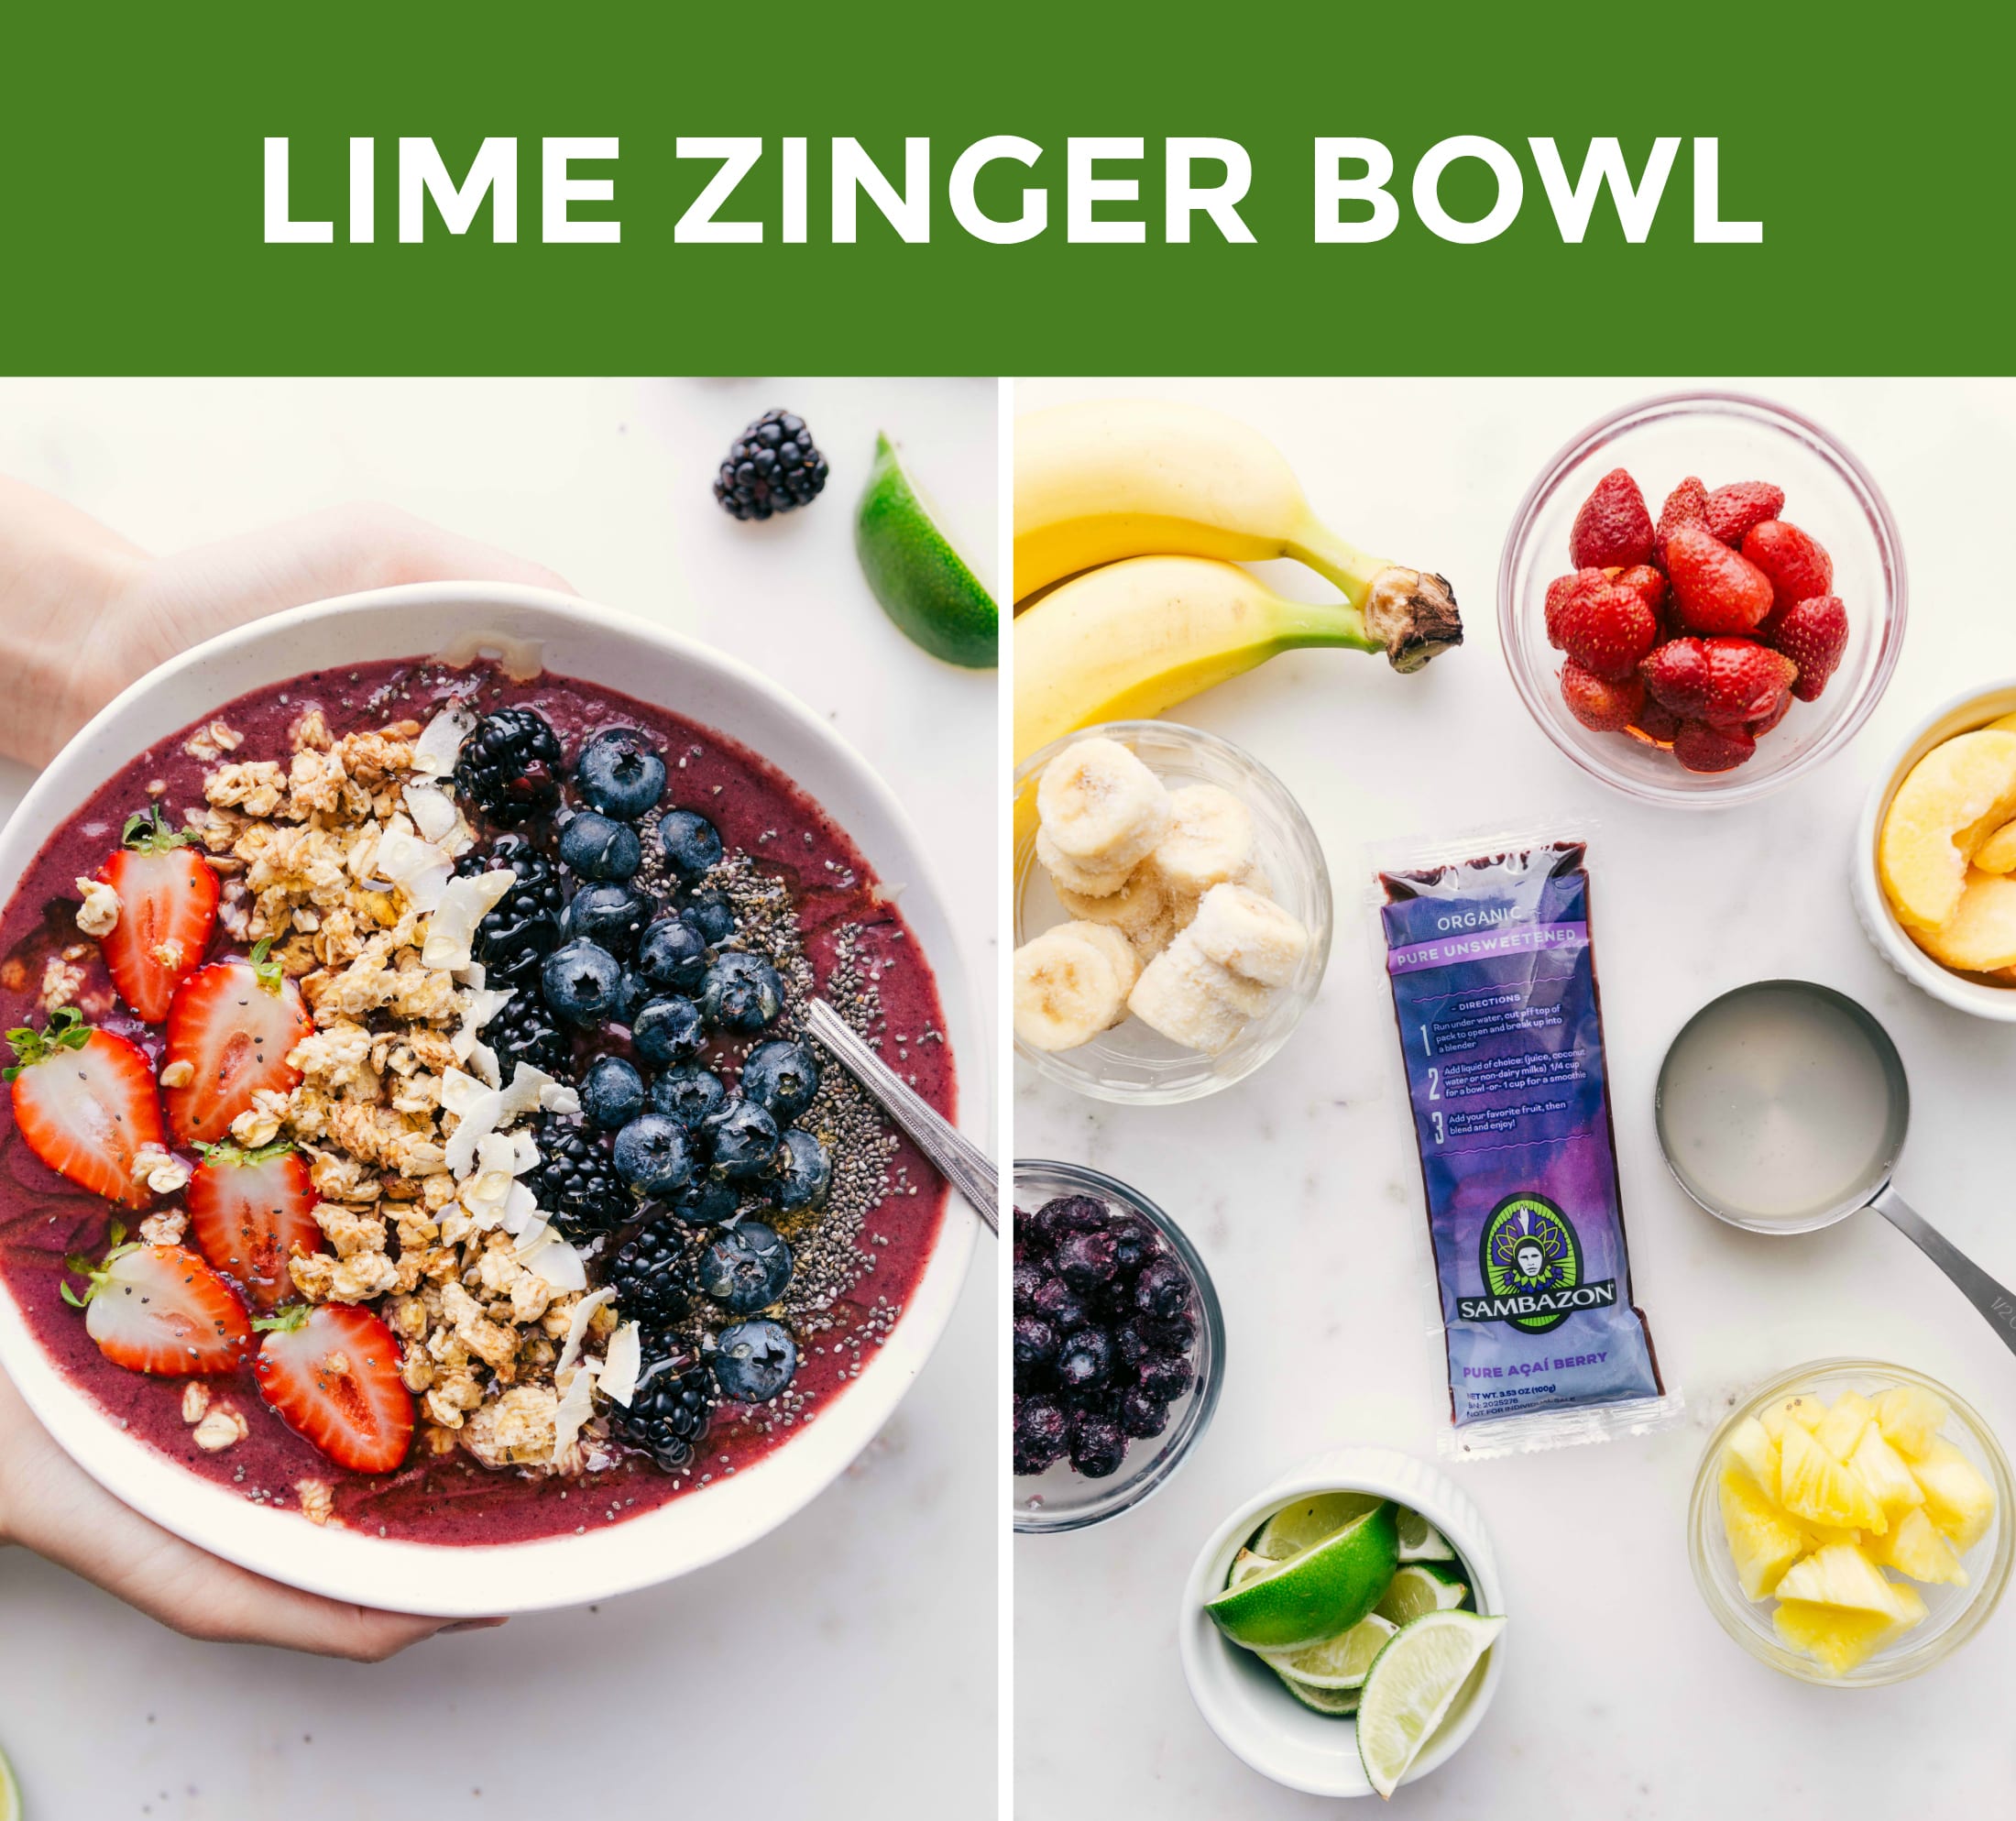 Side-by-side photos of a Lime Zinger Acai Bowl and an ingredient shot